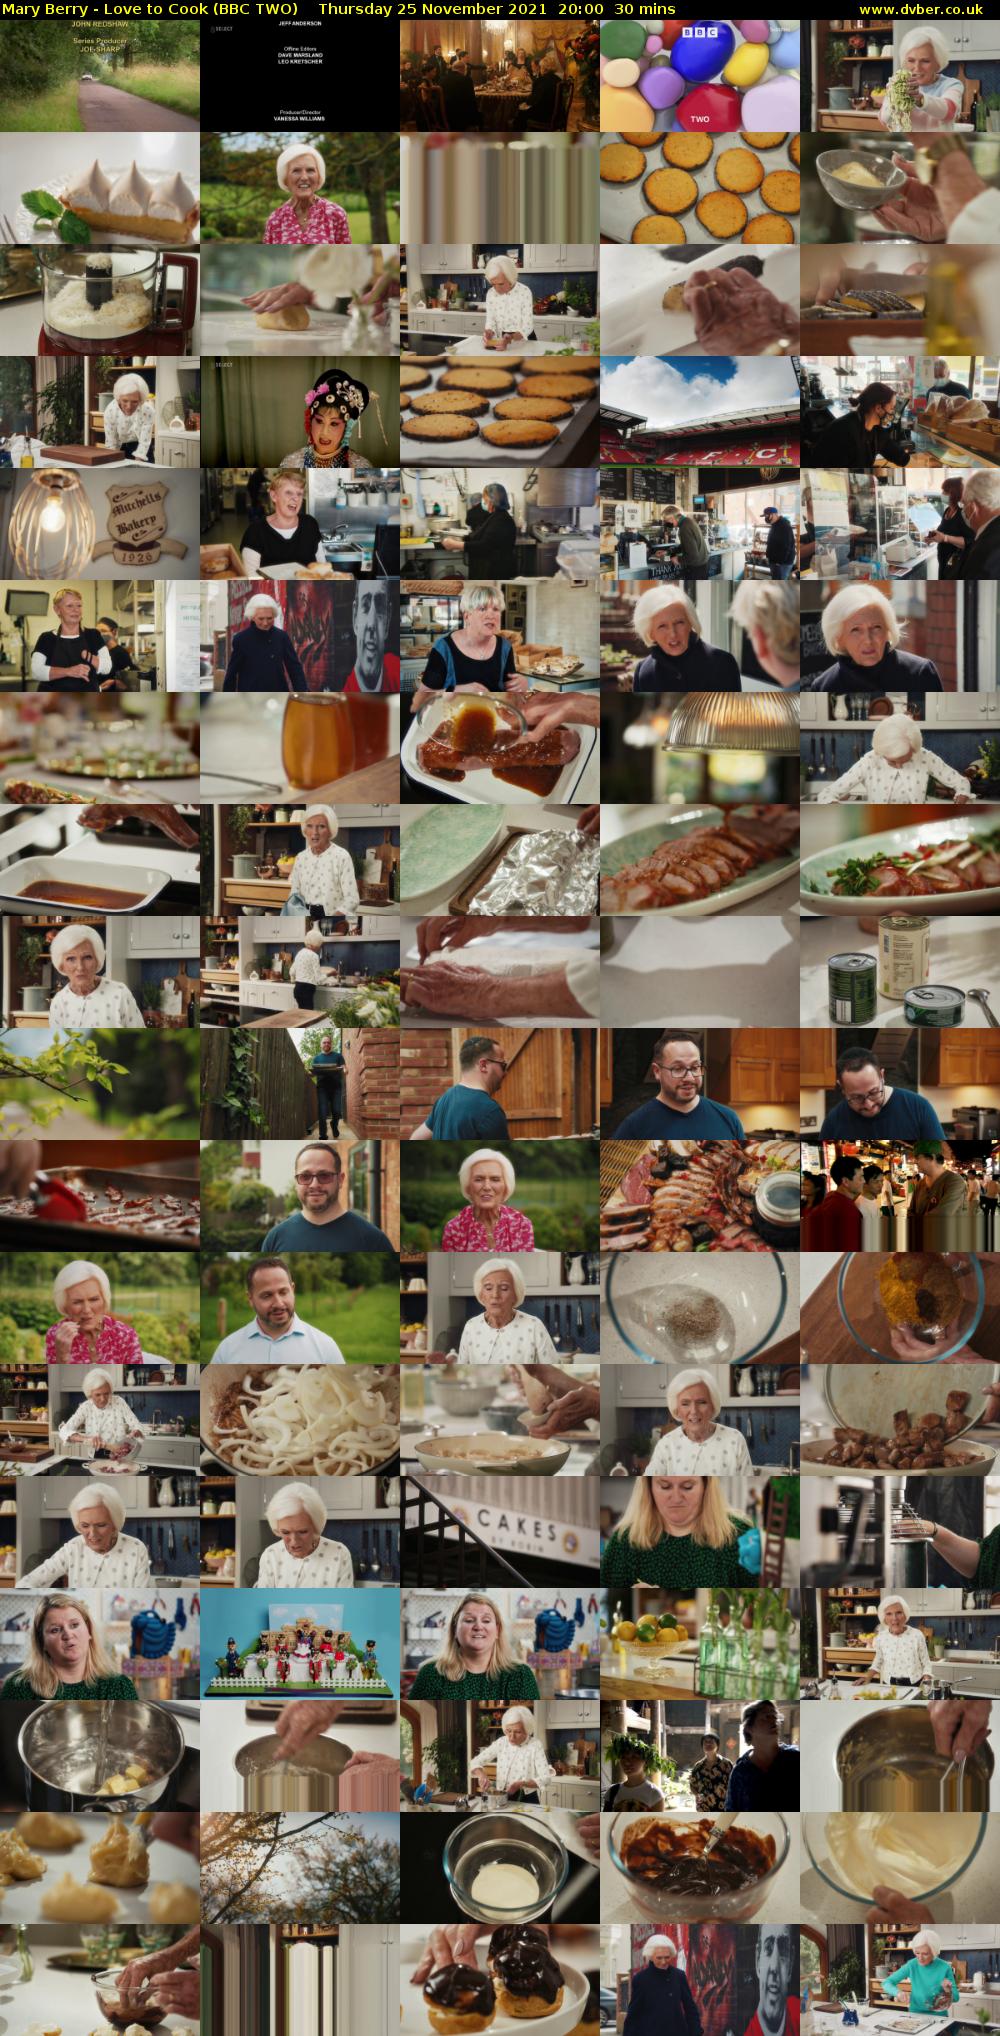 Mary Berry - Love to Cook (BBC TWO) Thursday 25 November 2021 20:00 - 20:30